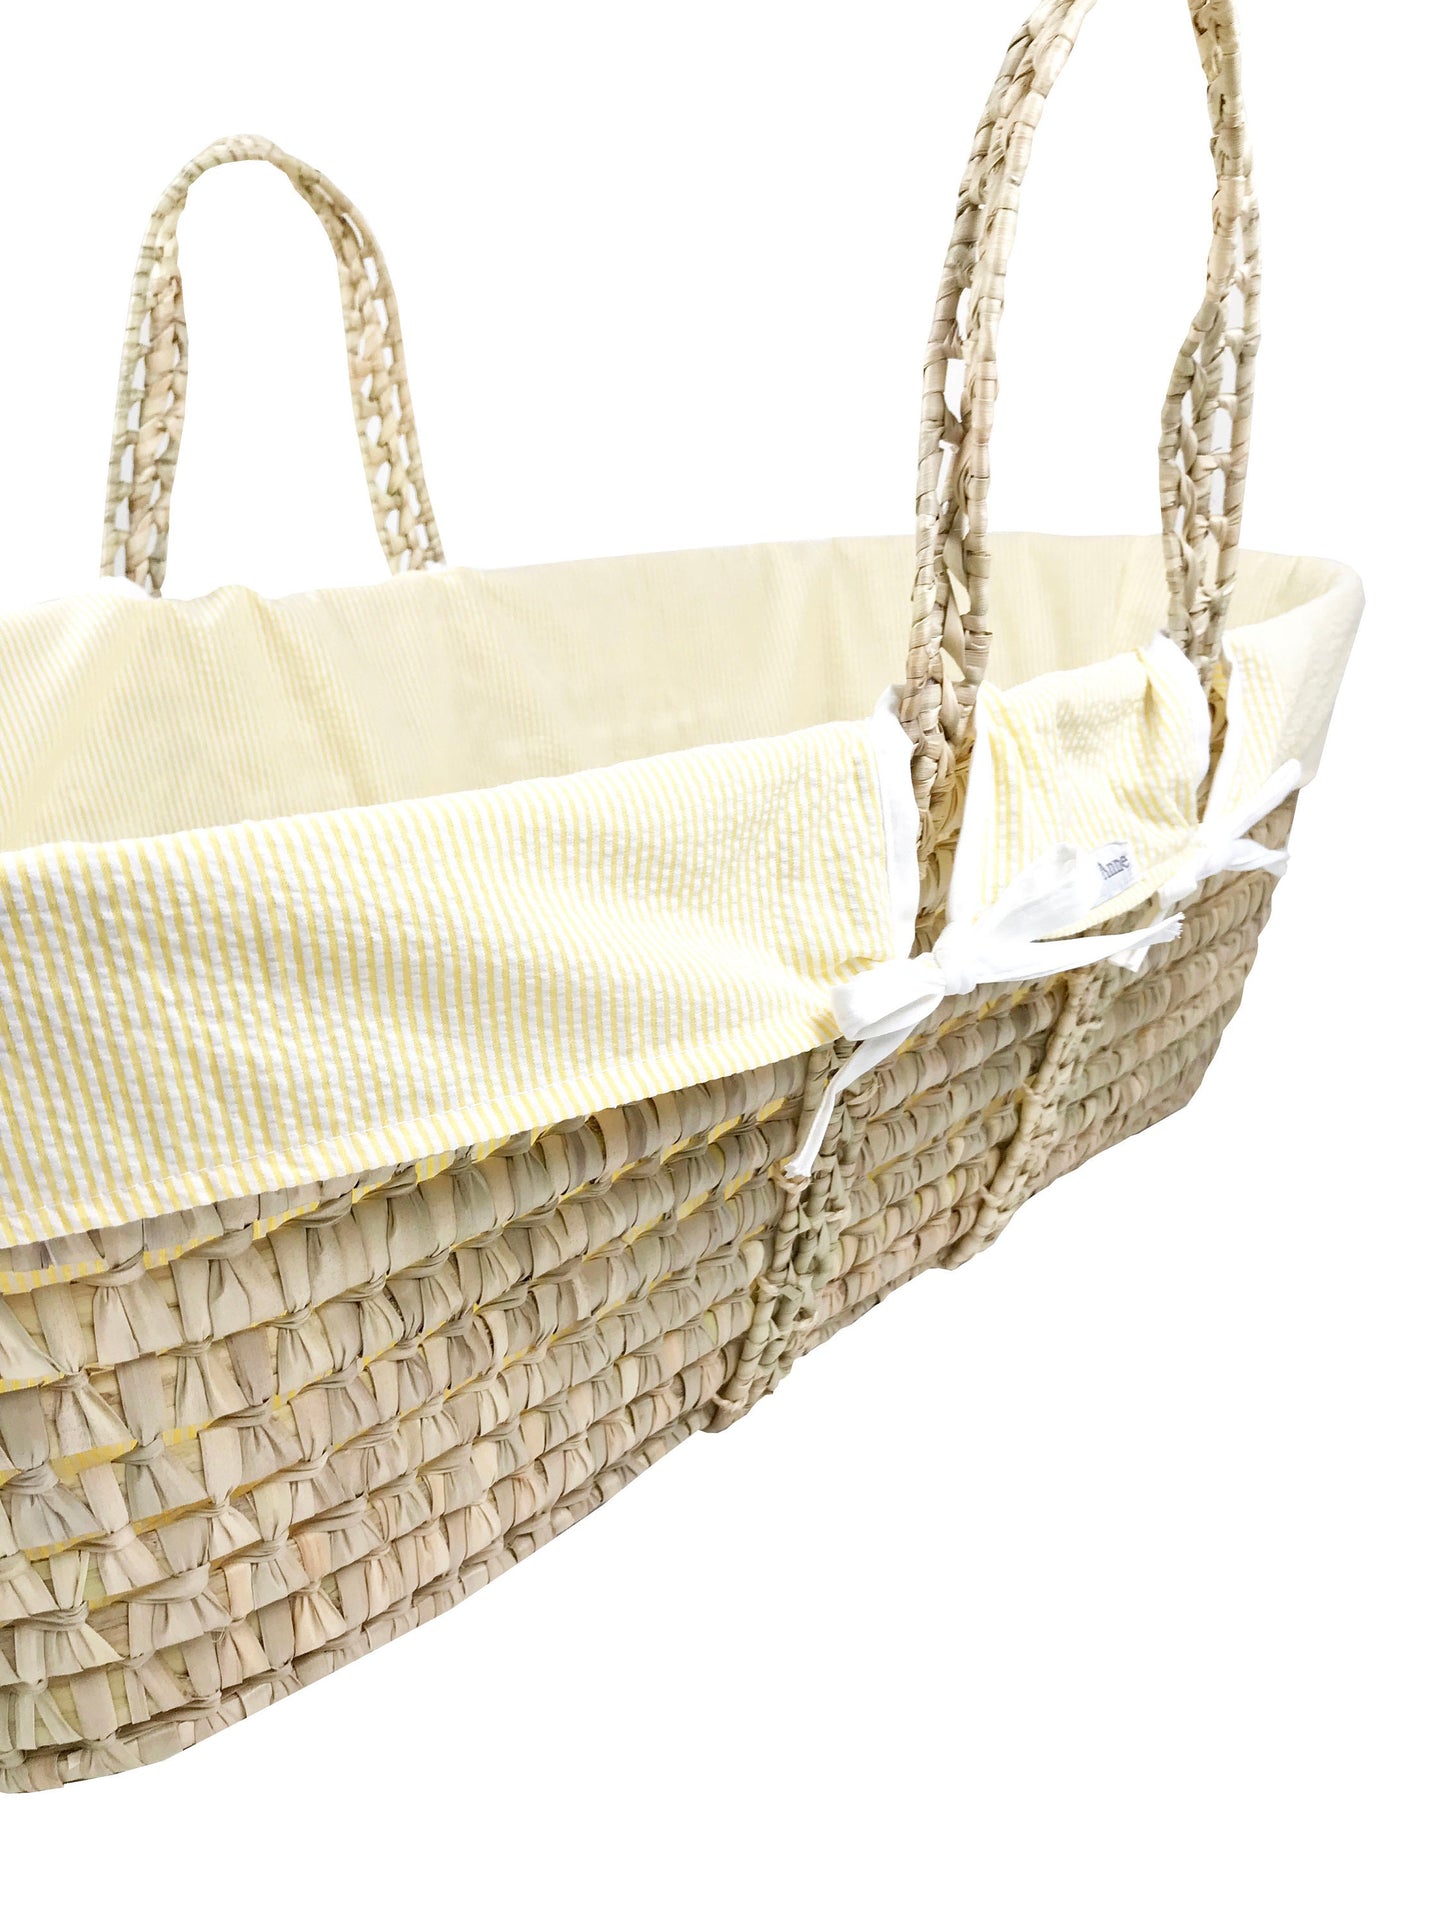 Traditional Style Moses Basket 3 Piece Bedding Set - Choose Fabric Color